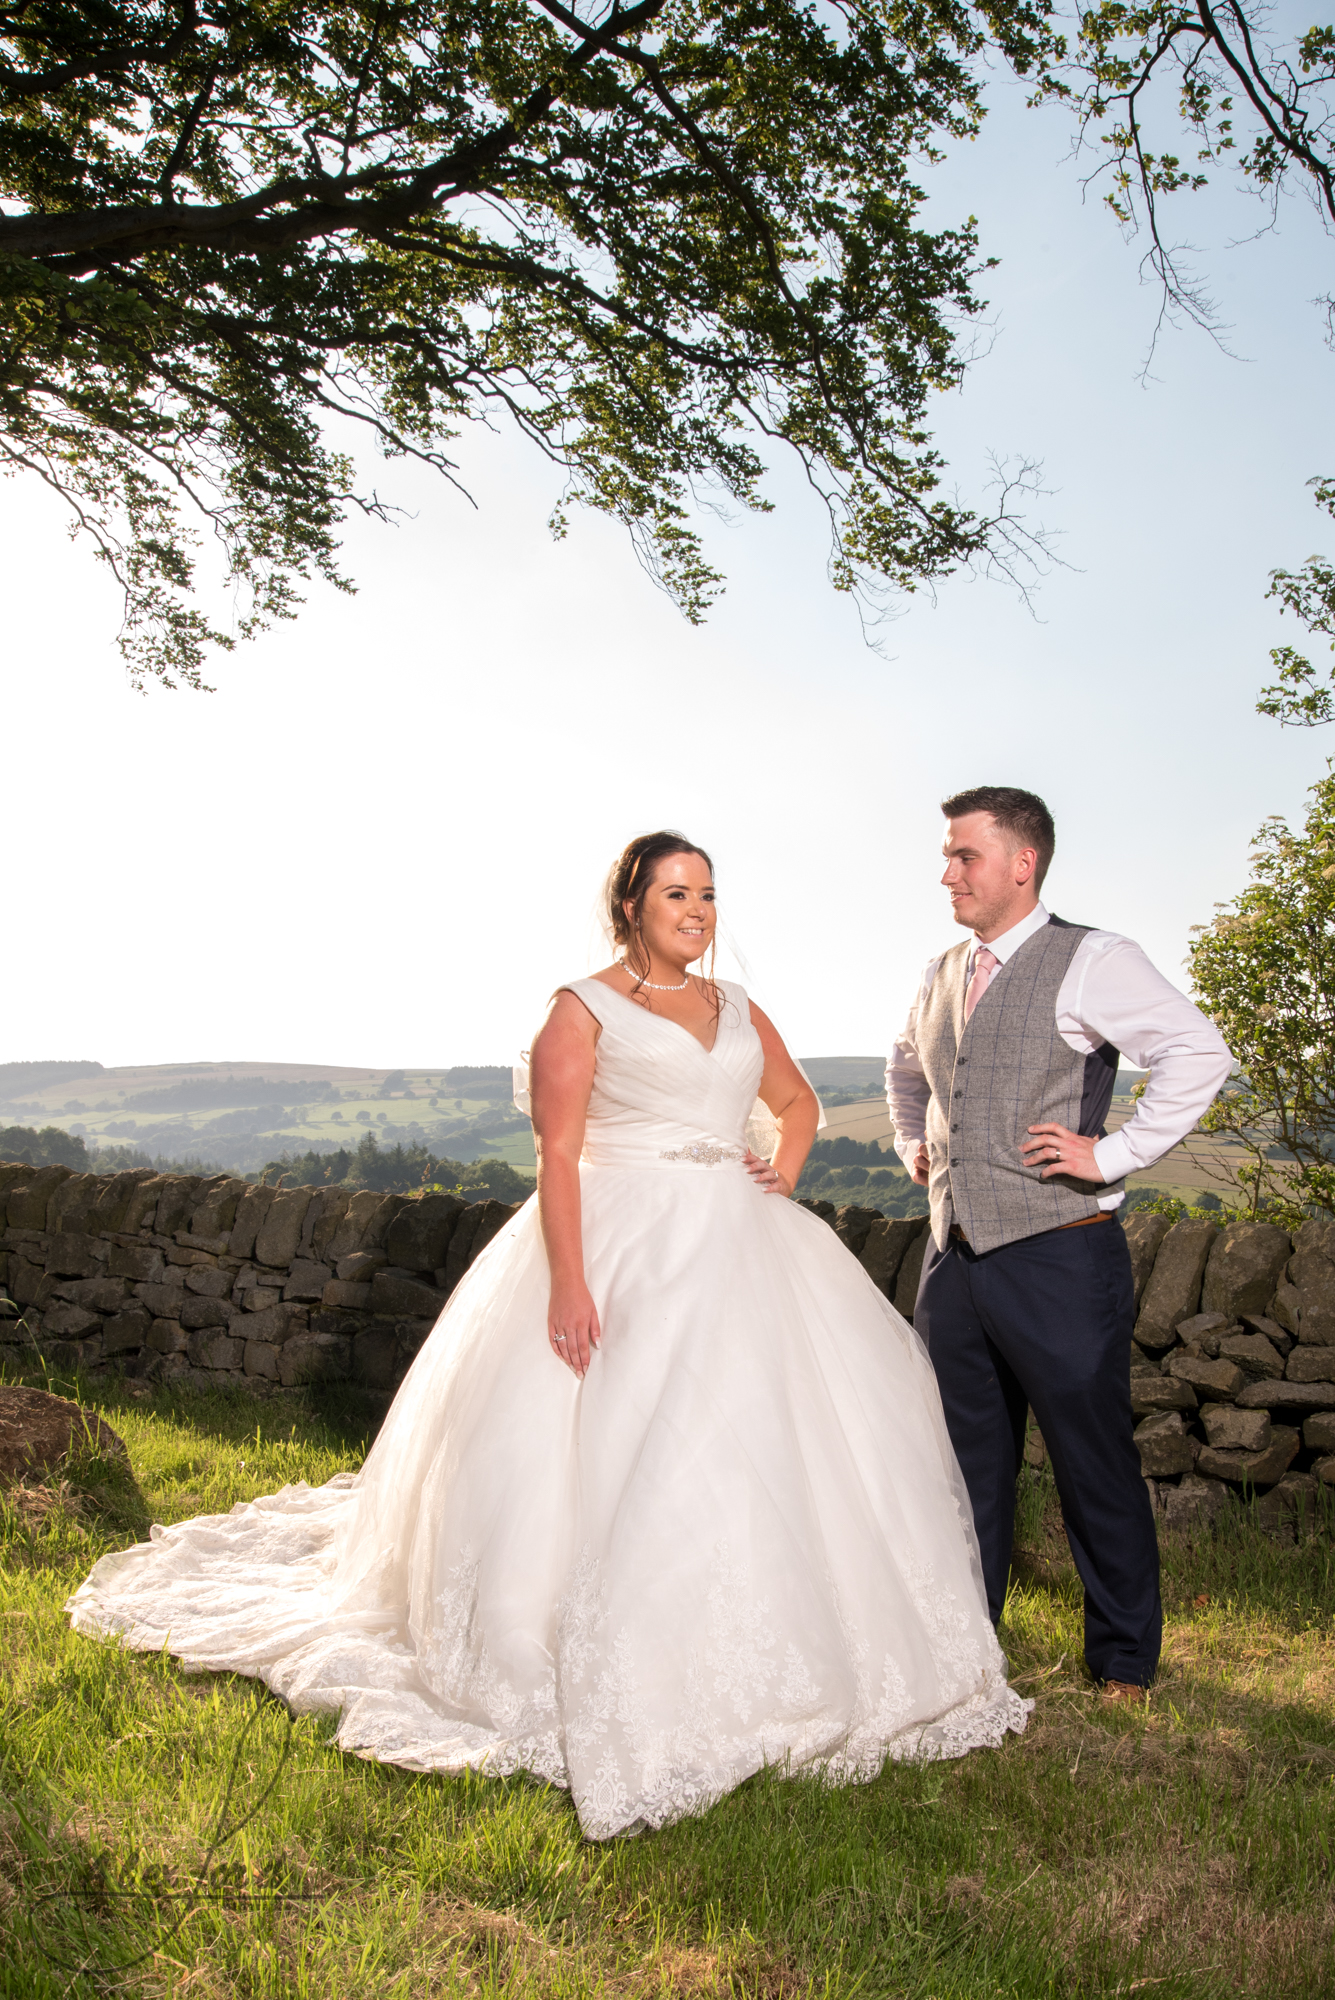 The bride and groom stand in the summer sunlight